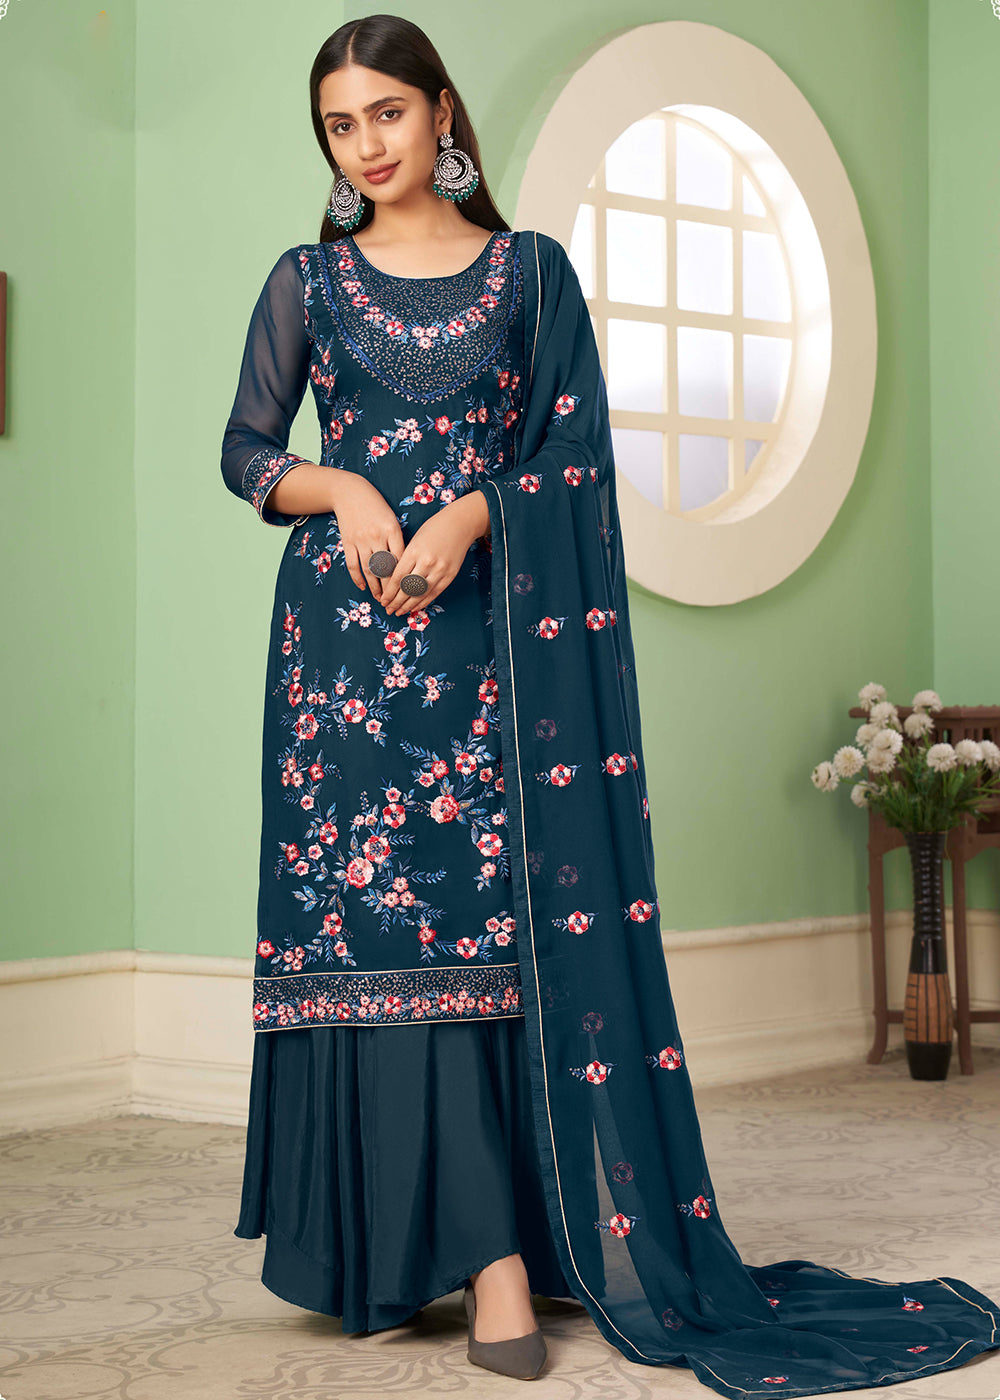 Buy Now Multi Thread Lovely Teal Georgette Palazzo Salwar Suit Online in USA, UK, Canada & Worldwide at Empress Clothing.